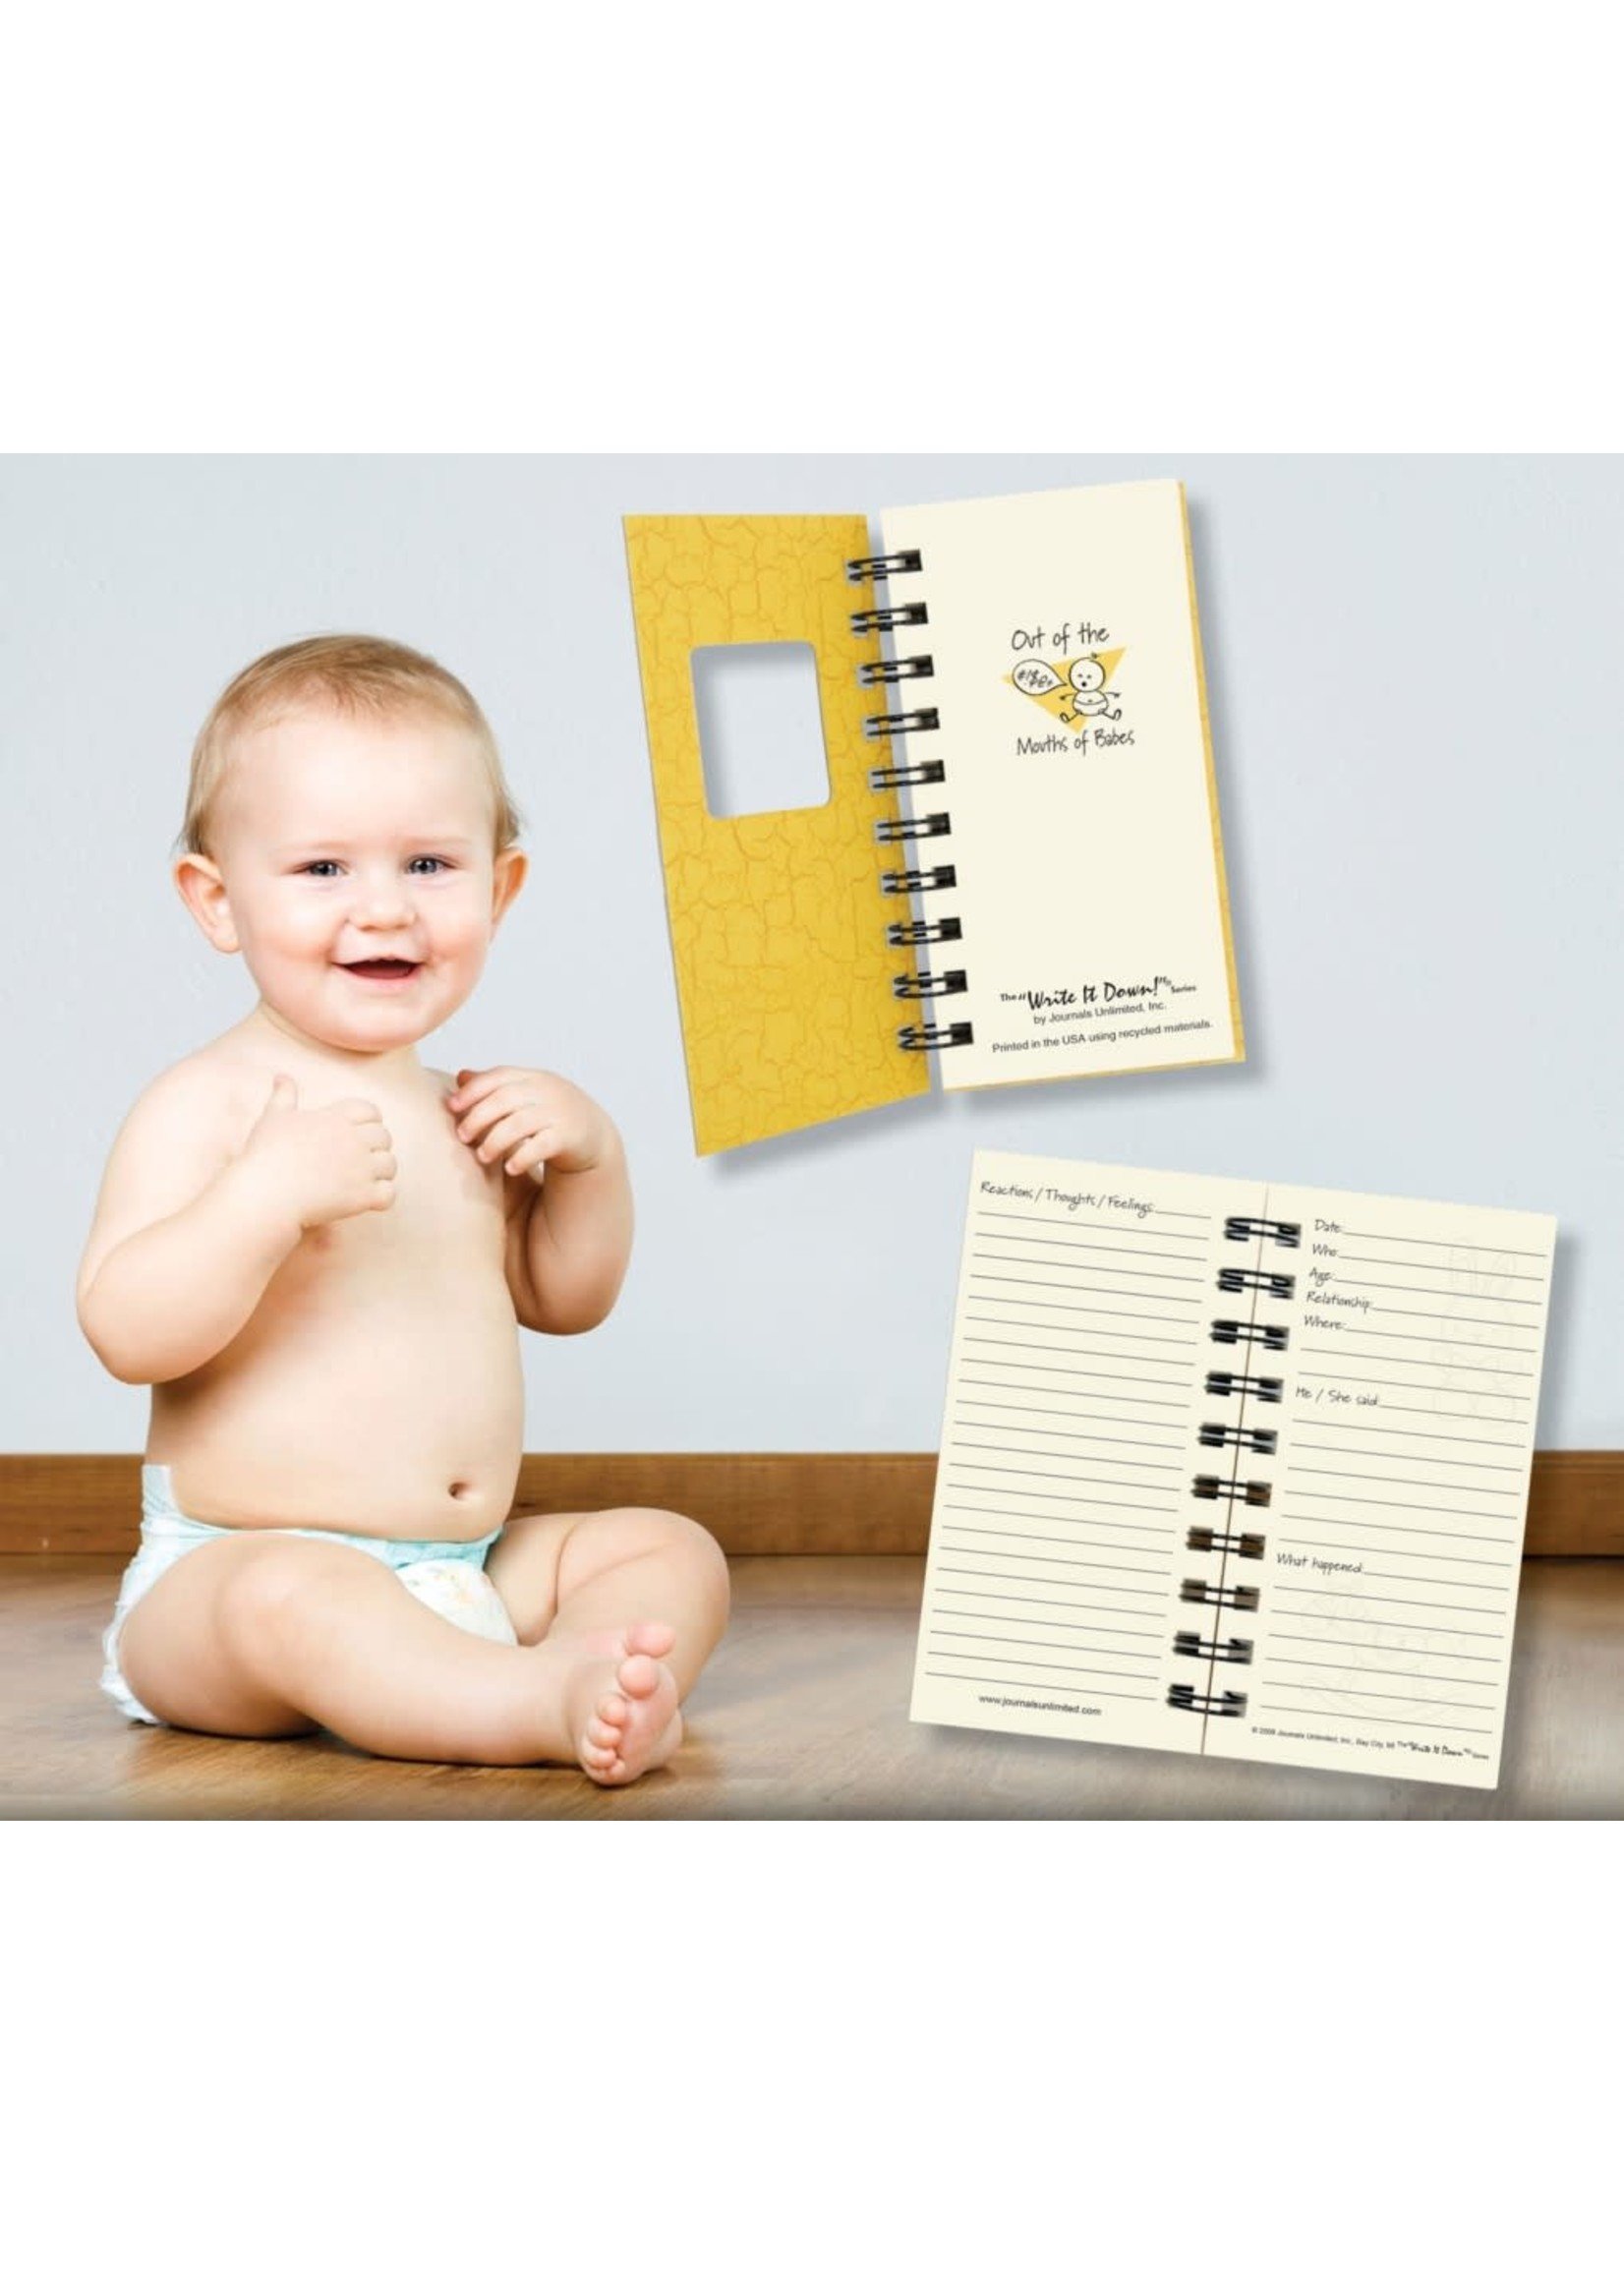 Journals Unlimited Mini - Out of the Mouth of Babes - Yellow